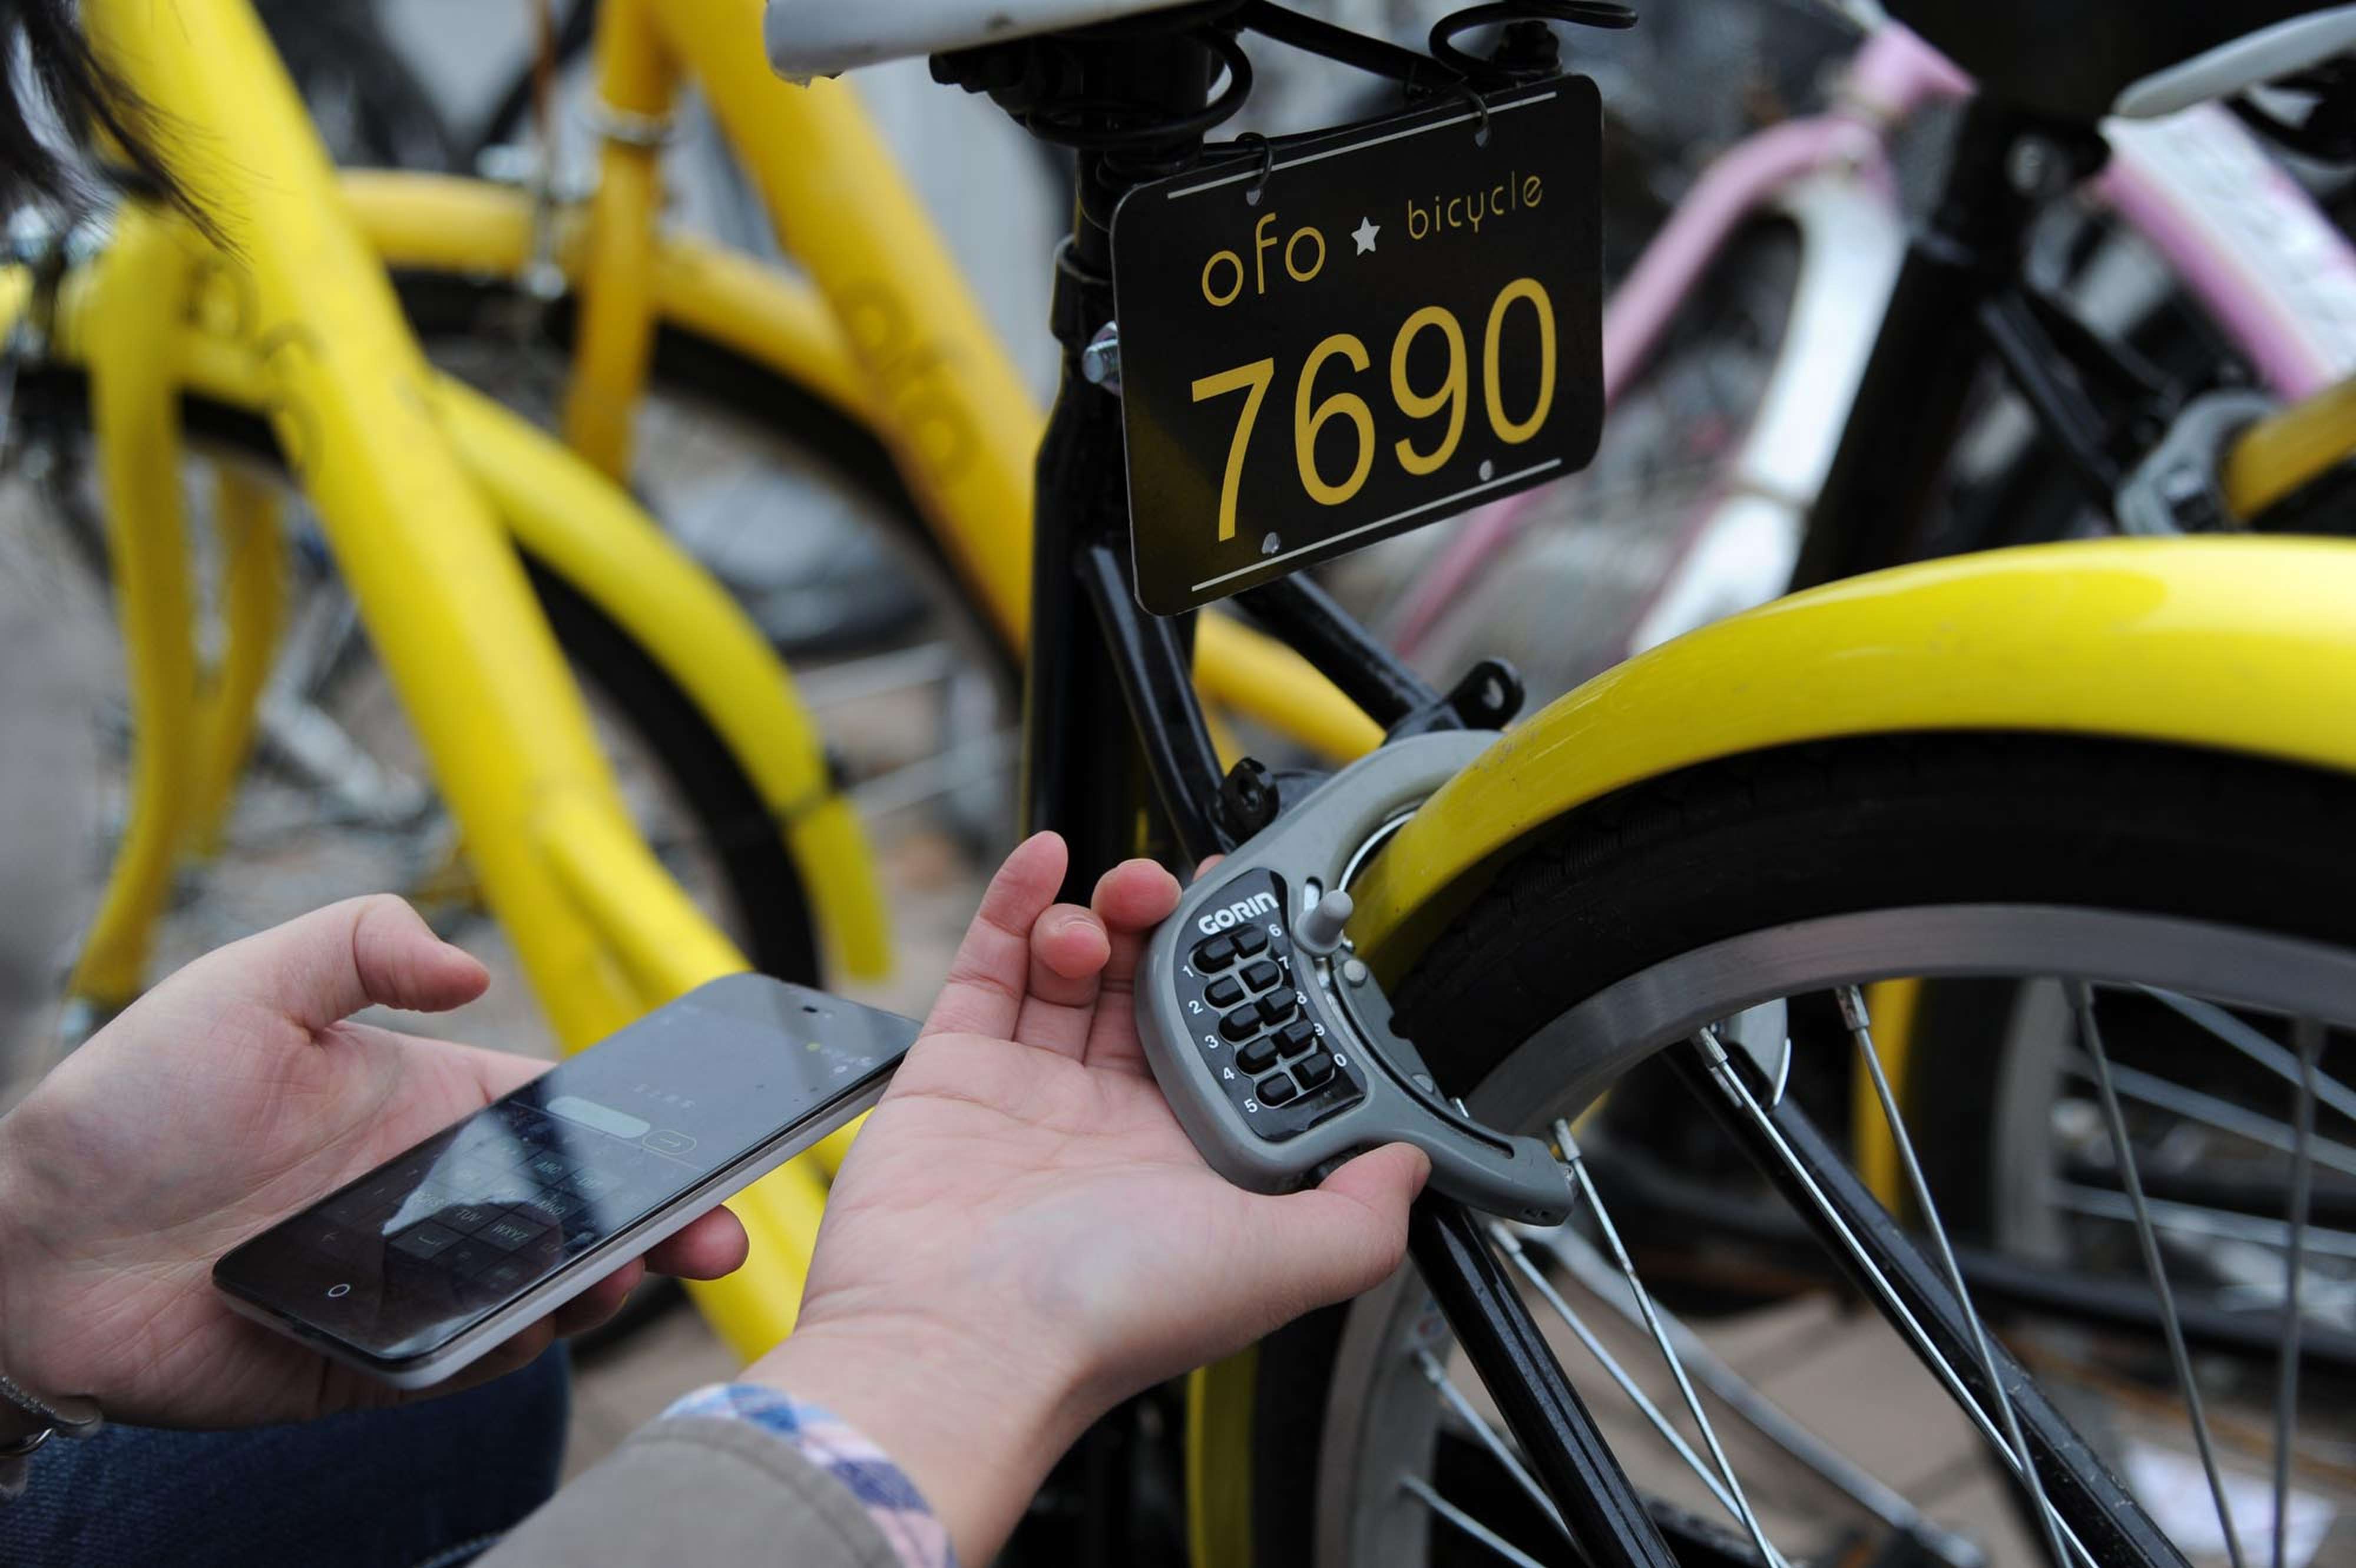 Ofo’s yellow bicycles, offering no-frills service without GPS, can be rented for 1 yuan per hour through the swipe on a smartphone. Photo: ChinaFotoPress